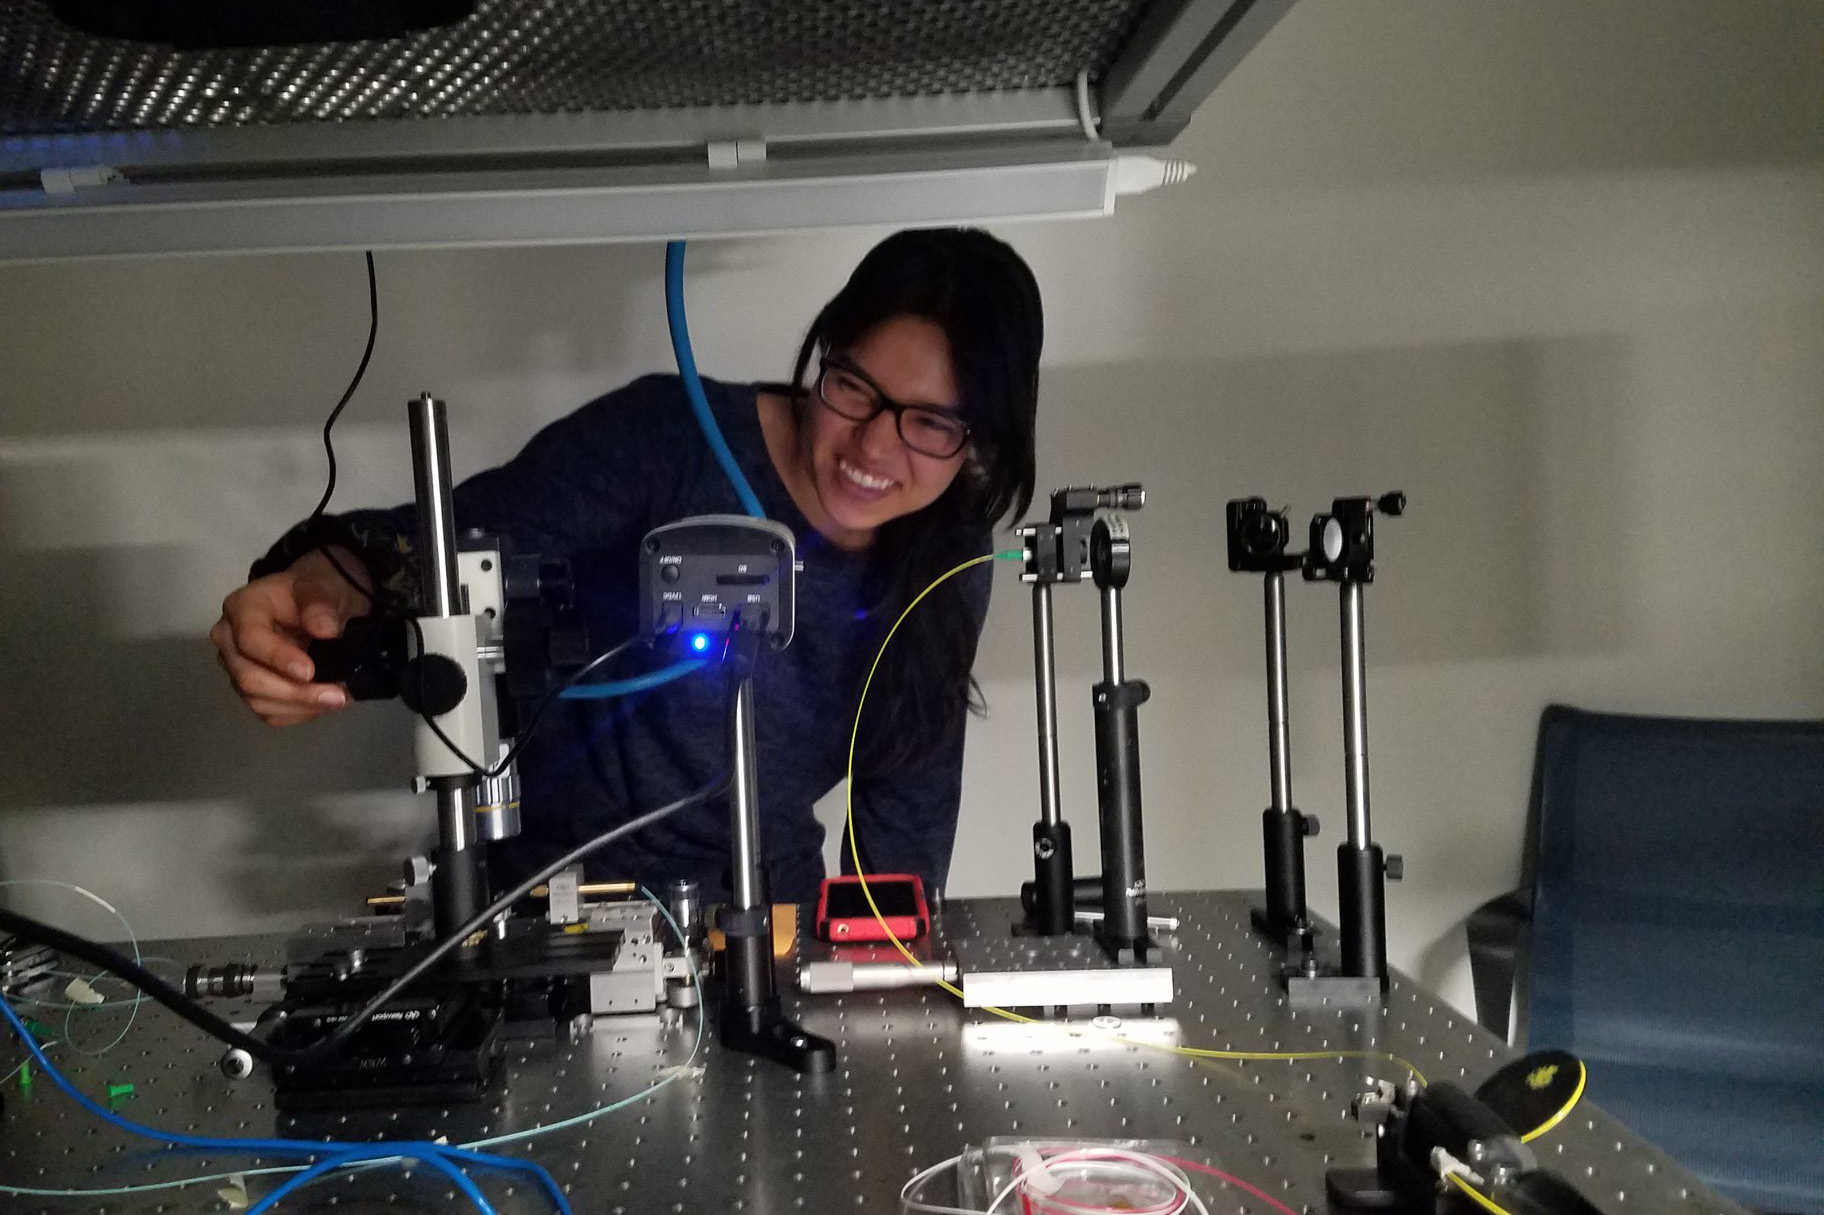 Marissa and her setup in the lab.